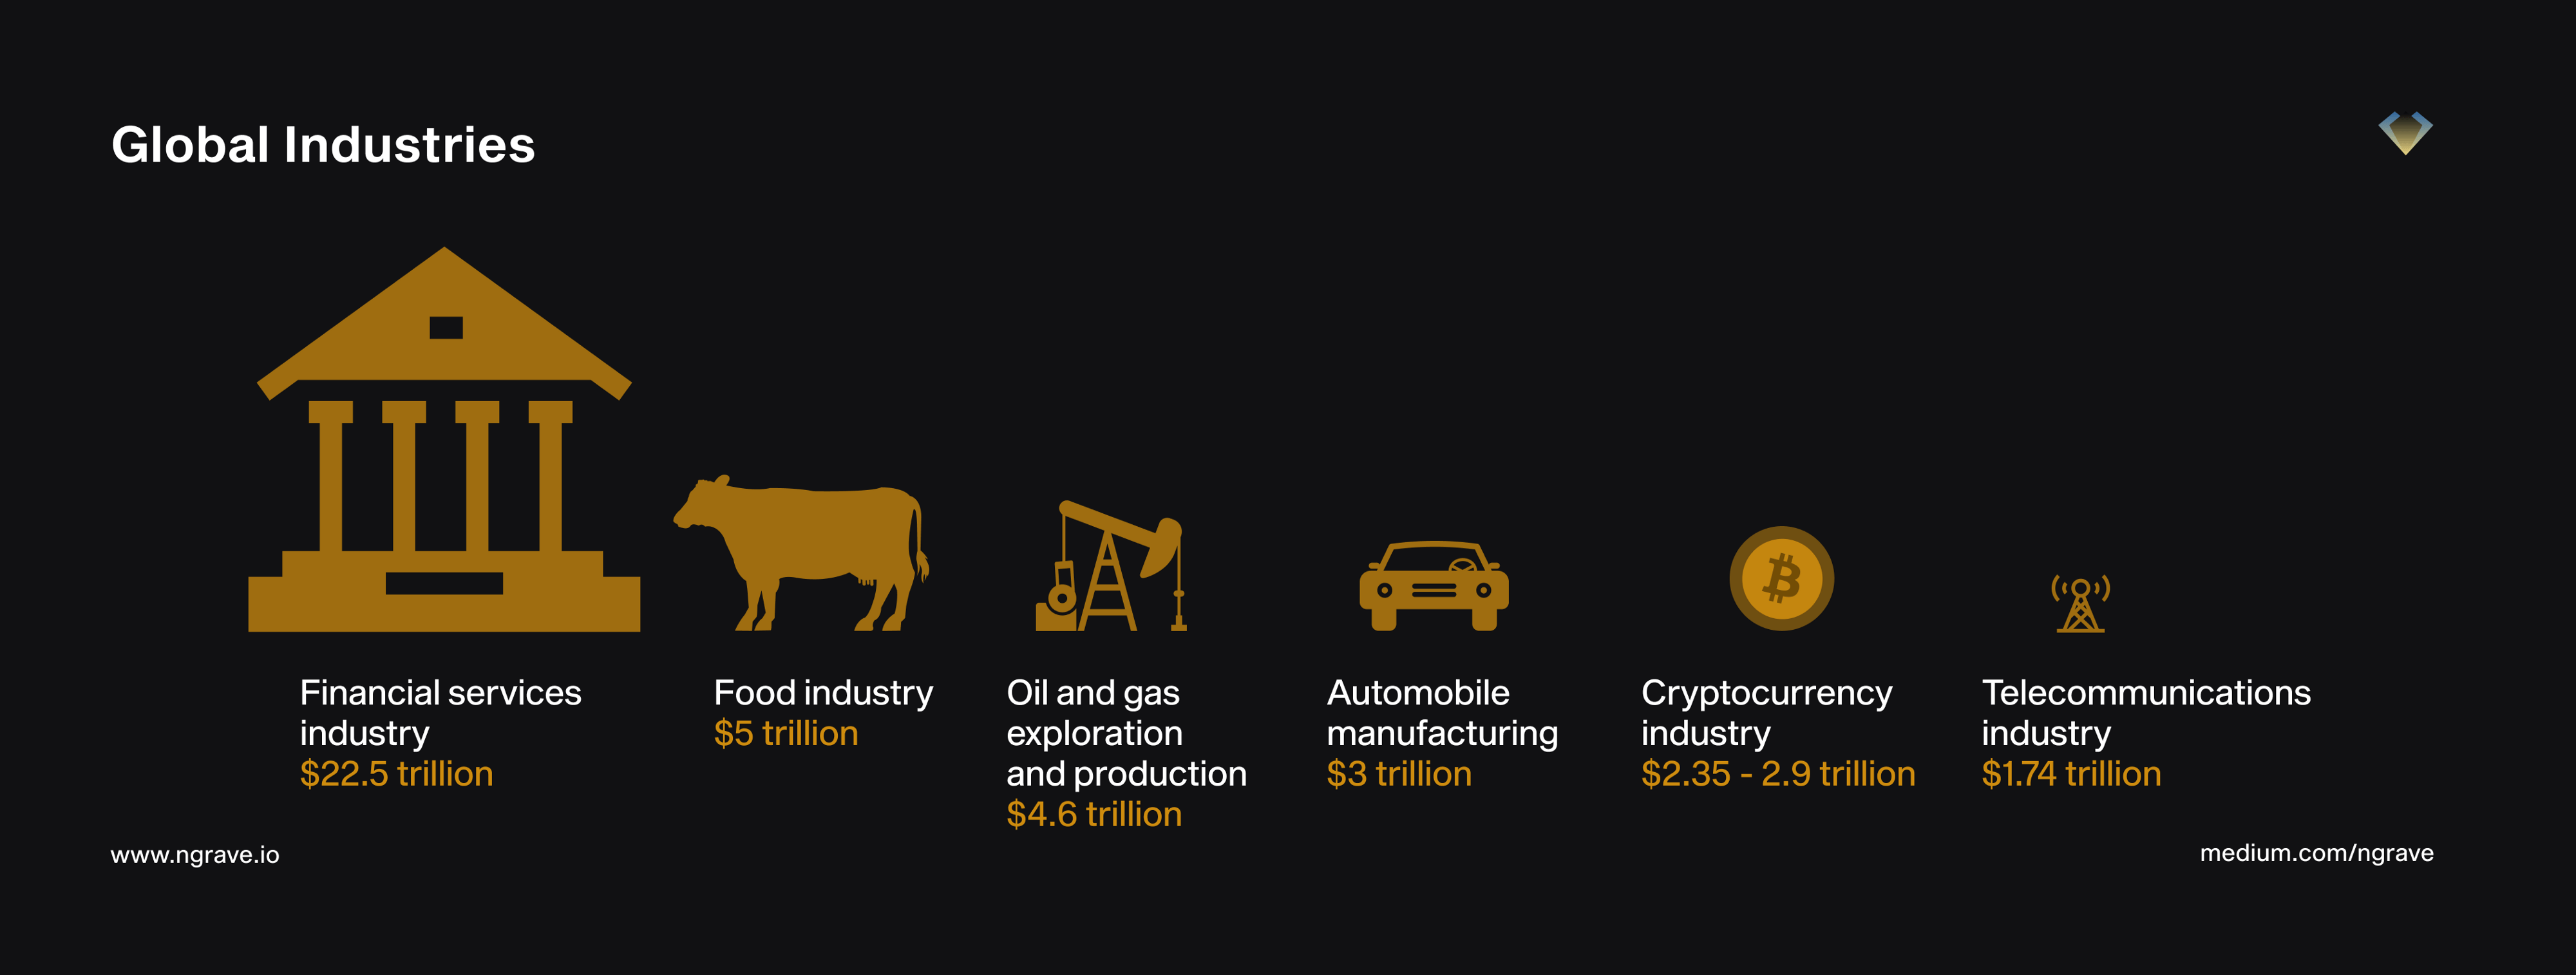 Crypto Industry vs. Global Industries (NGRAVE)